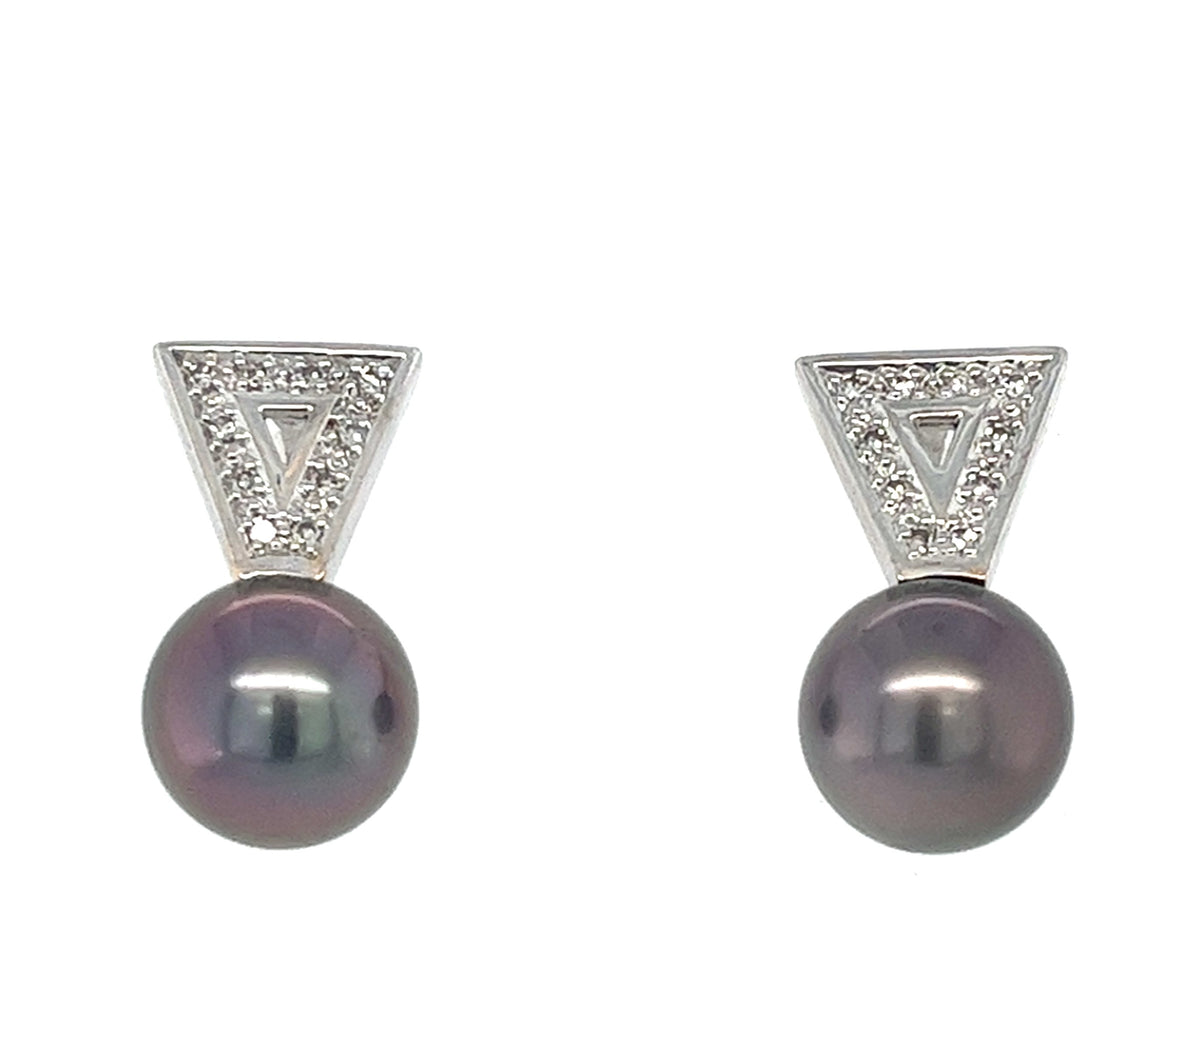 14KT WHITE GOLD FANCY LADIES DIAMOND AND PEARL EARRINGS